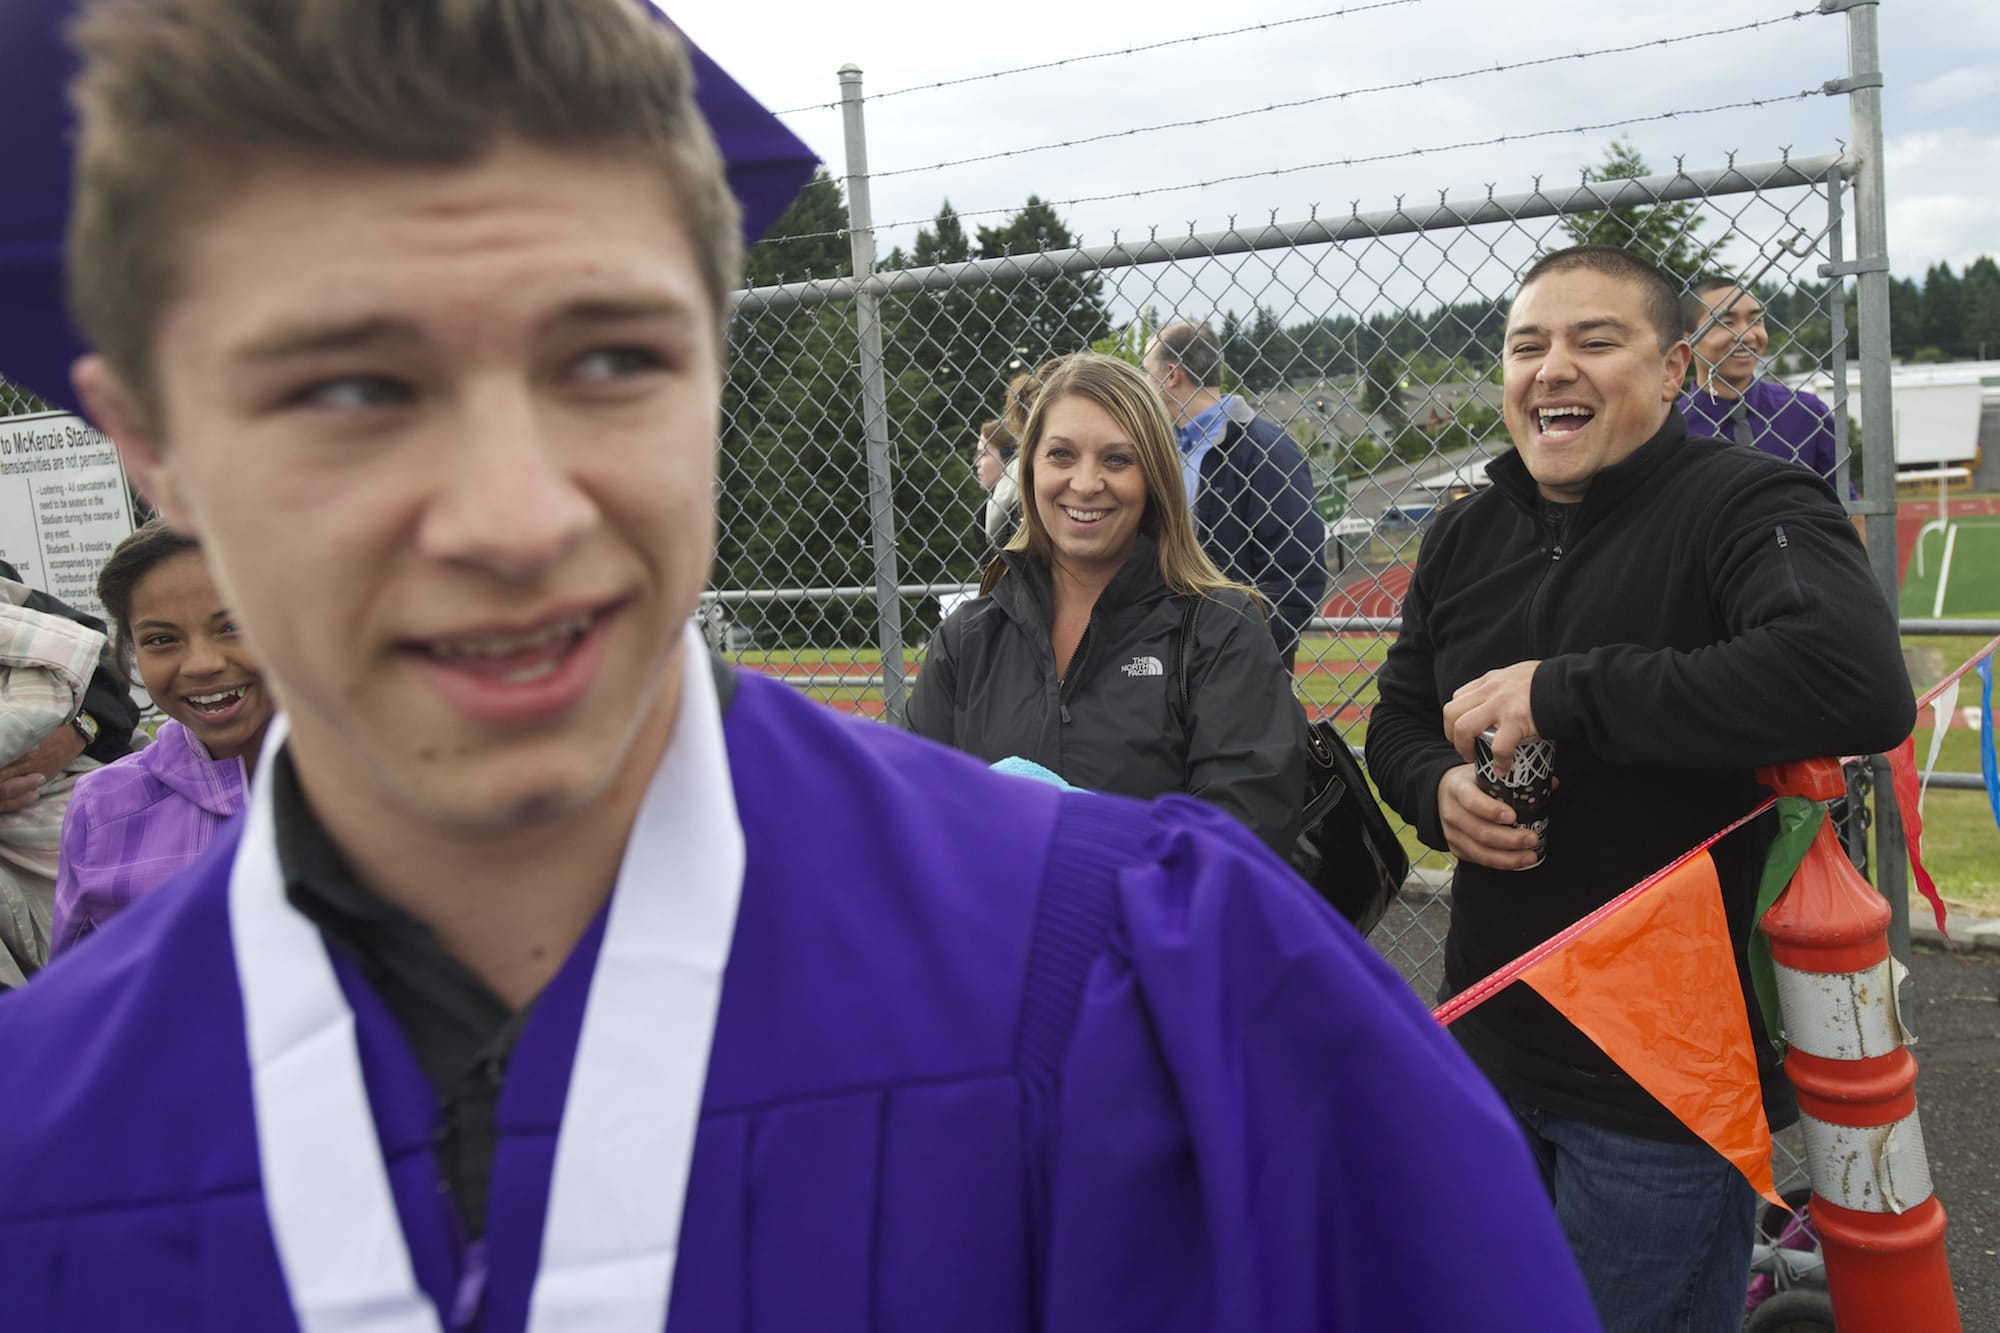 Amy and David Morales arrived at McKenzie Stadium three hours before Heritage High School's commencement ceremony to be first in line to see their son Gabriel Morales graduate.